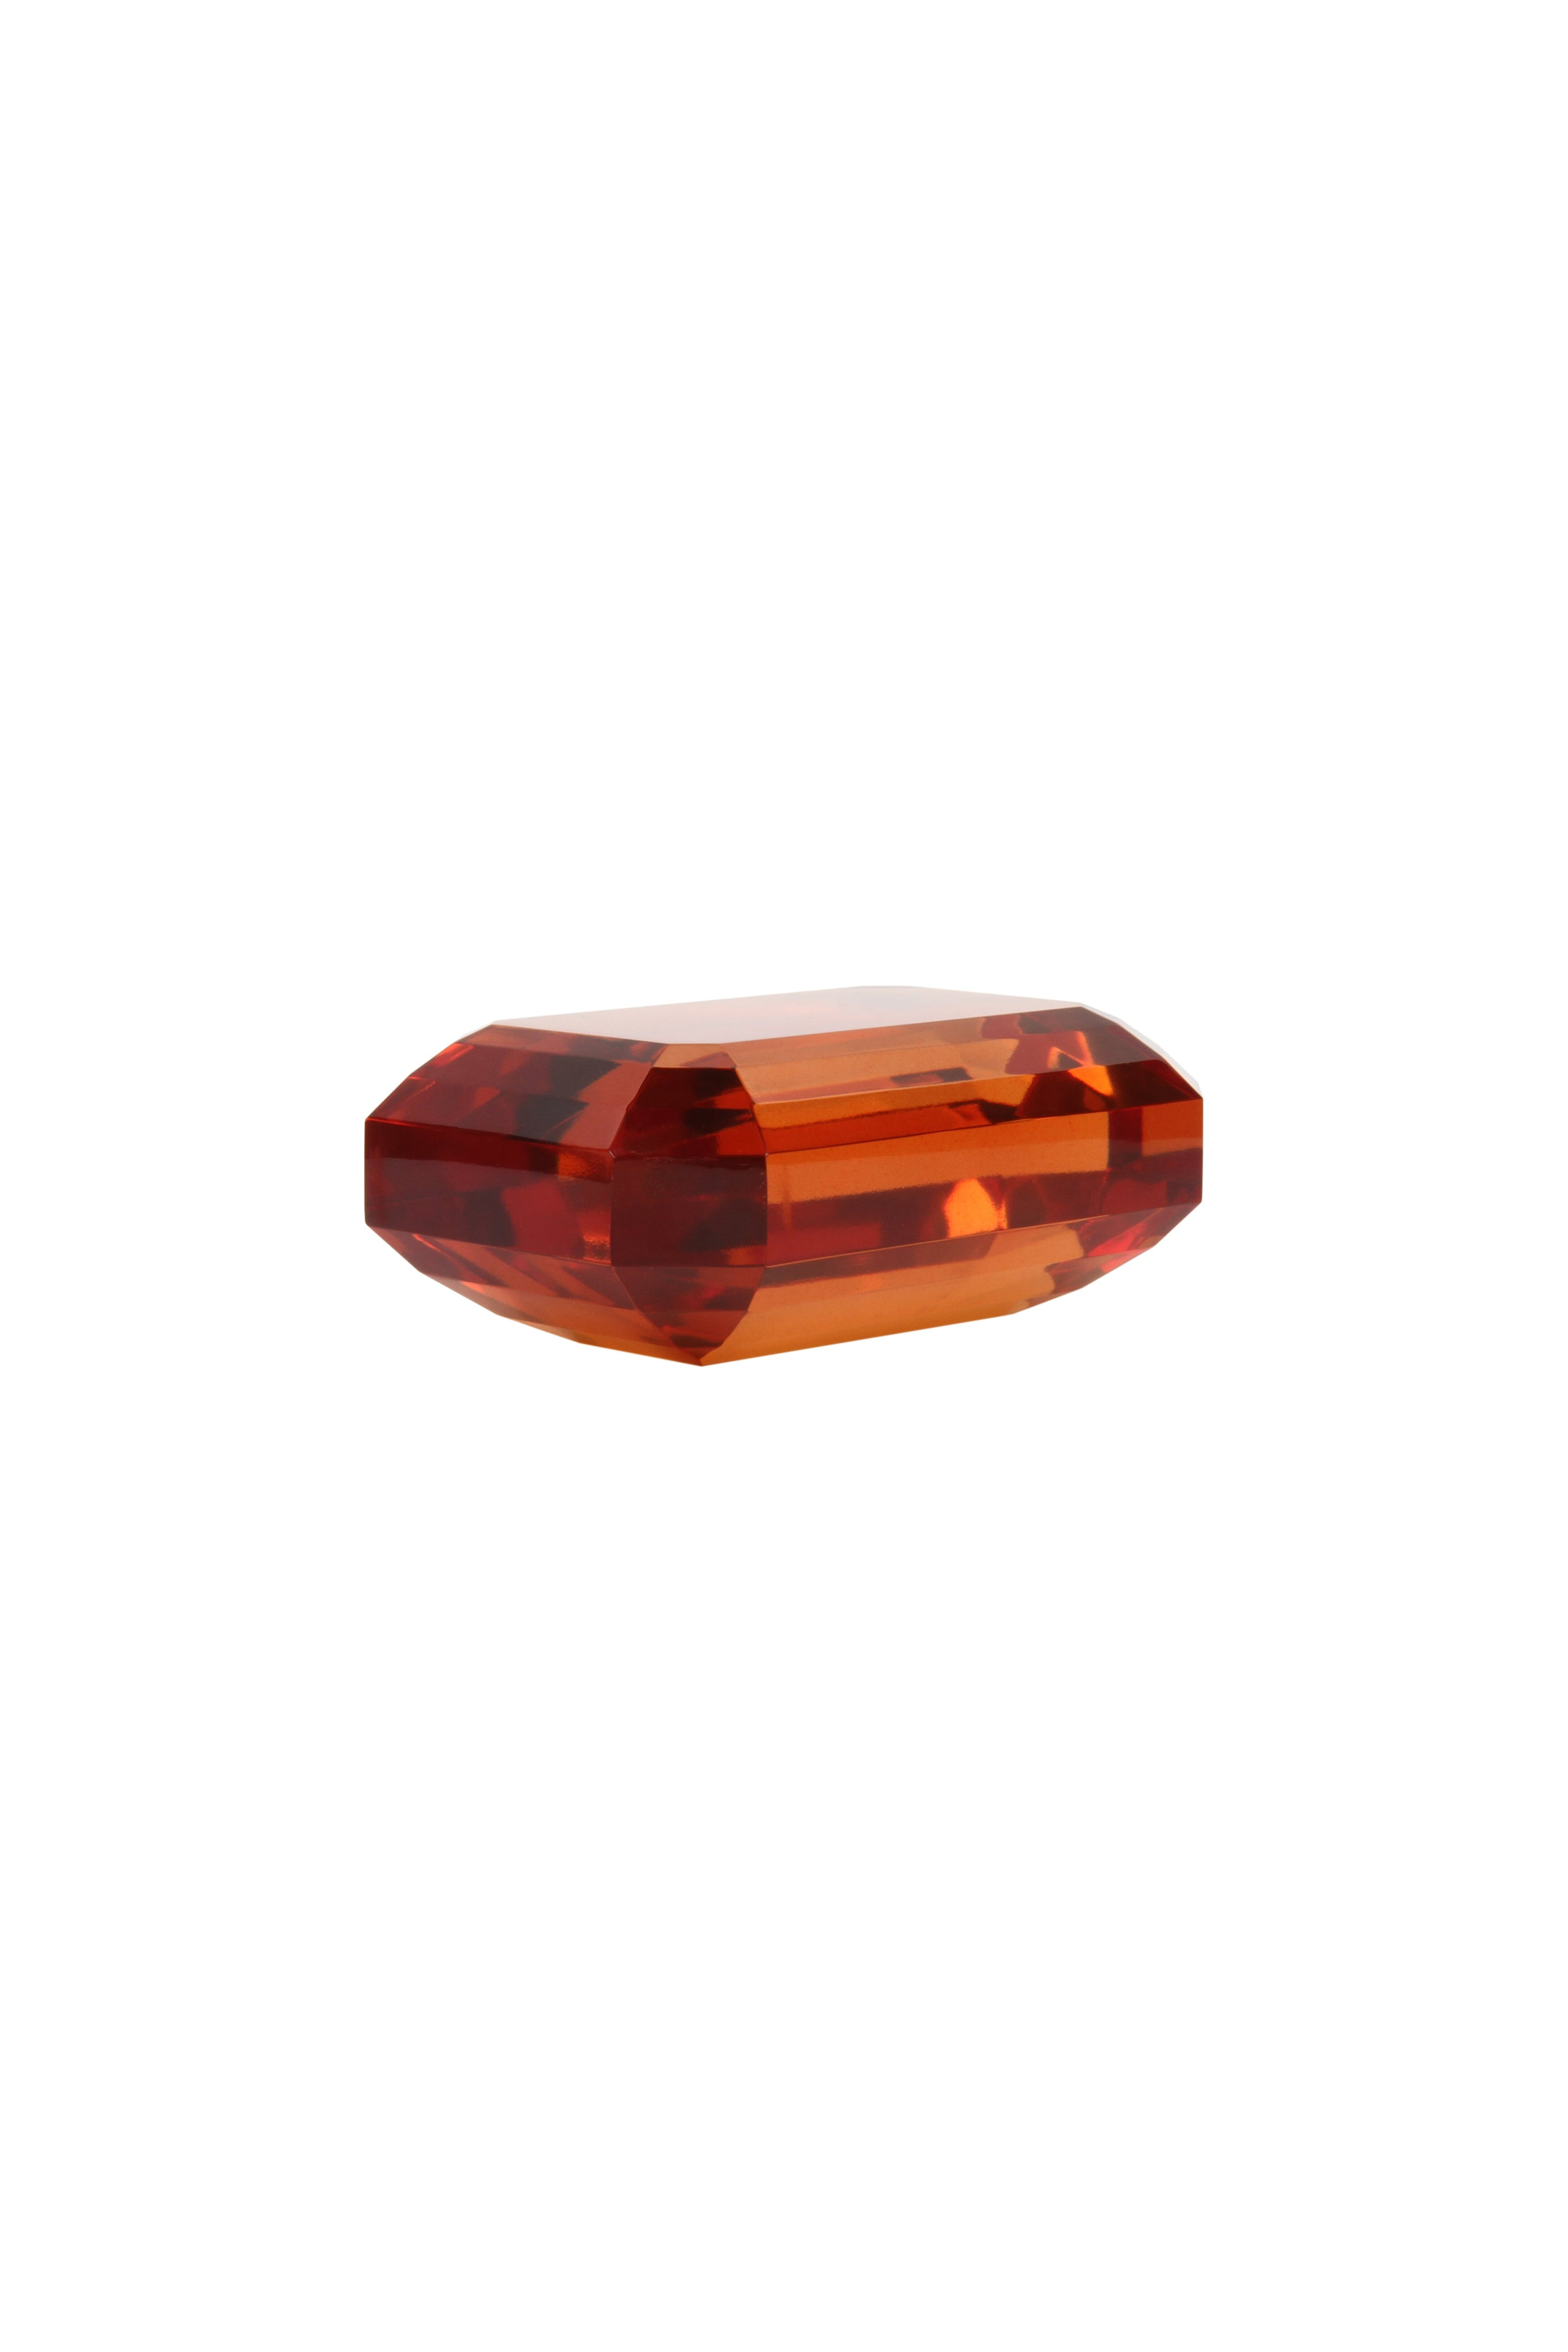 The JEWEL paperweight in Amber